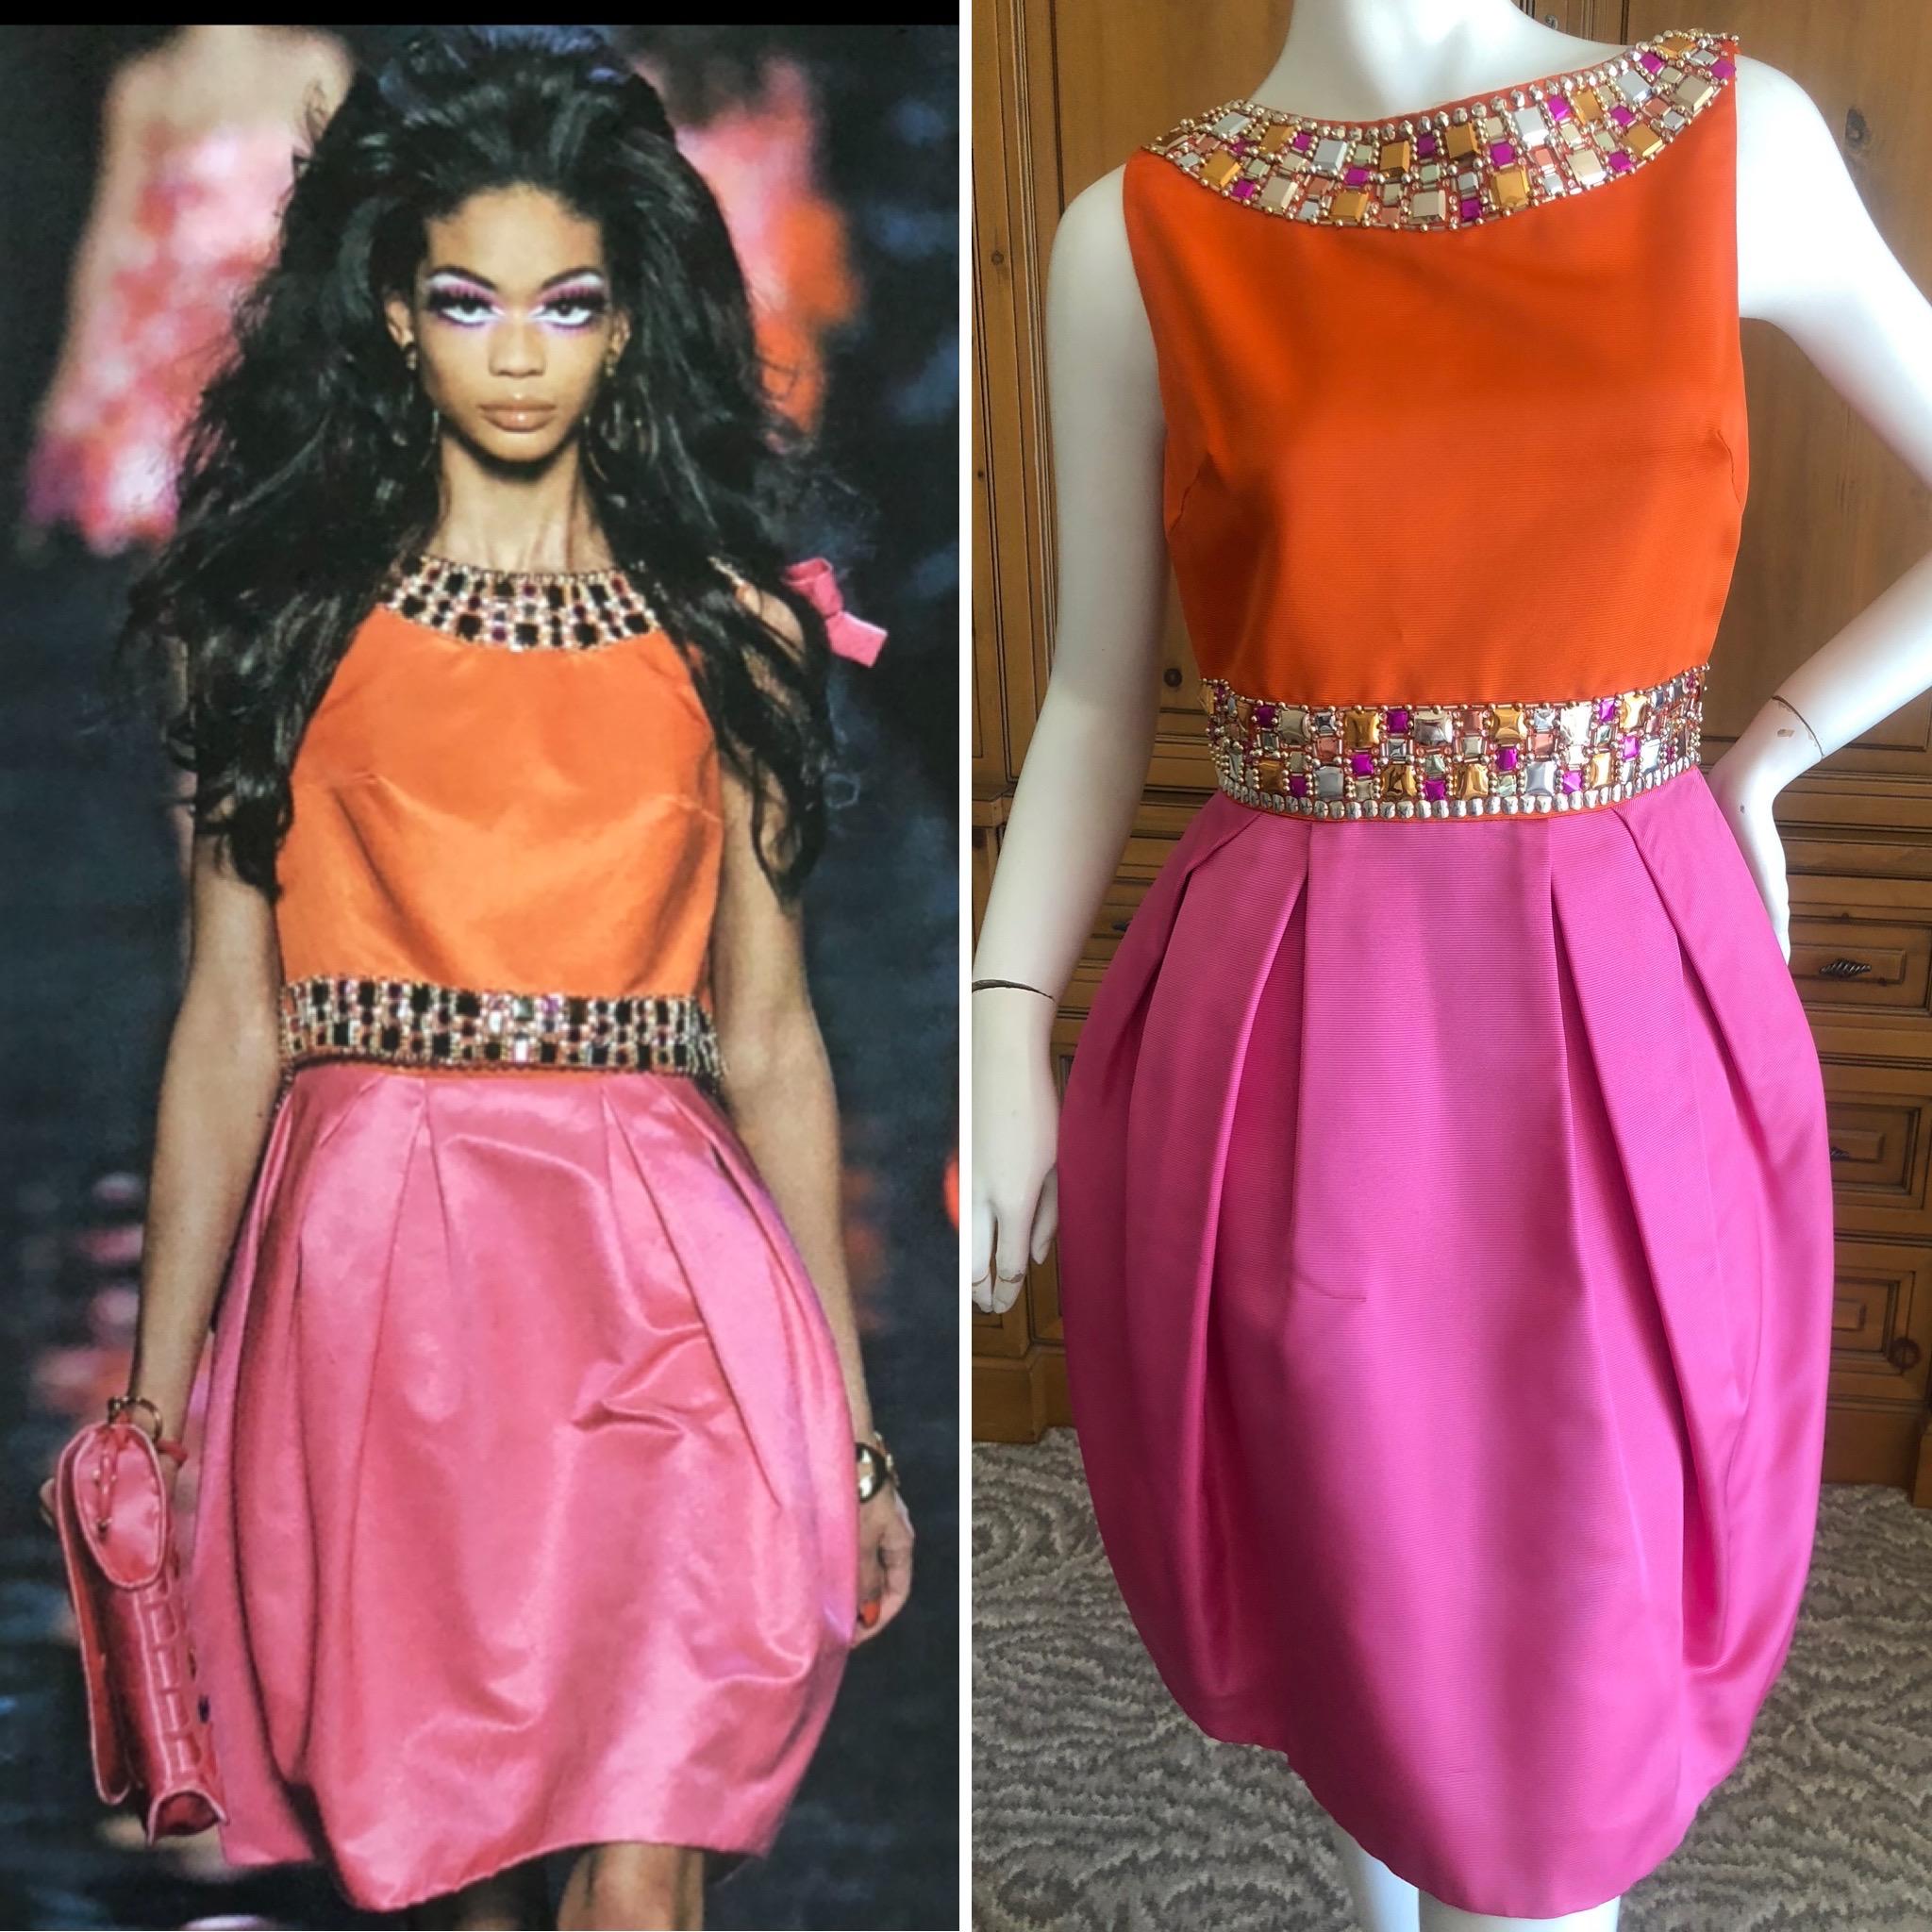 Christian Dior by John Galliano Orange and Pink Silk Sixties Style Embellished Slip Dress
  This is so pretty, please use the zoom to see the details.
Galliano's homage to the 1960's
 The ornamentation is amazing, so glam! 
Apx Size 36-38
Bust